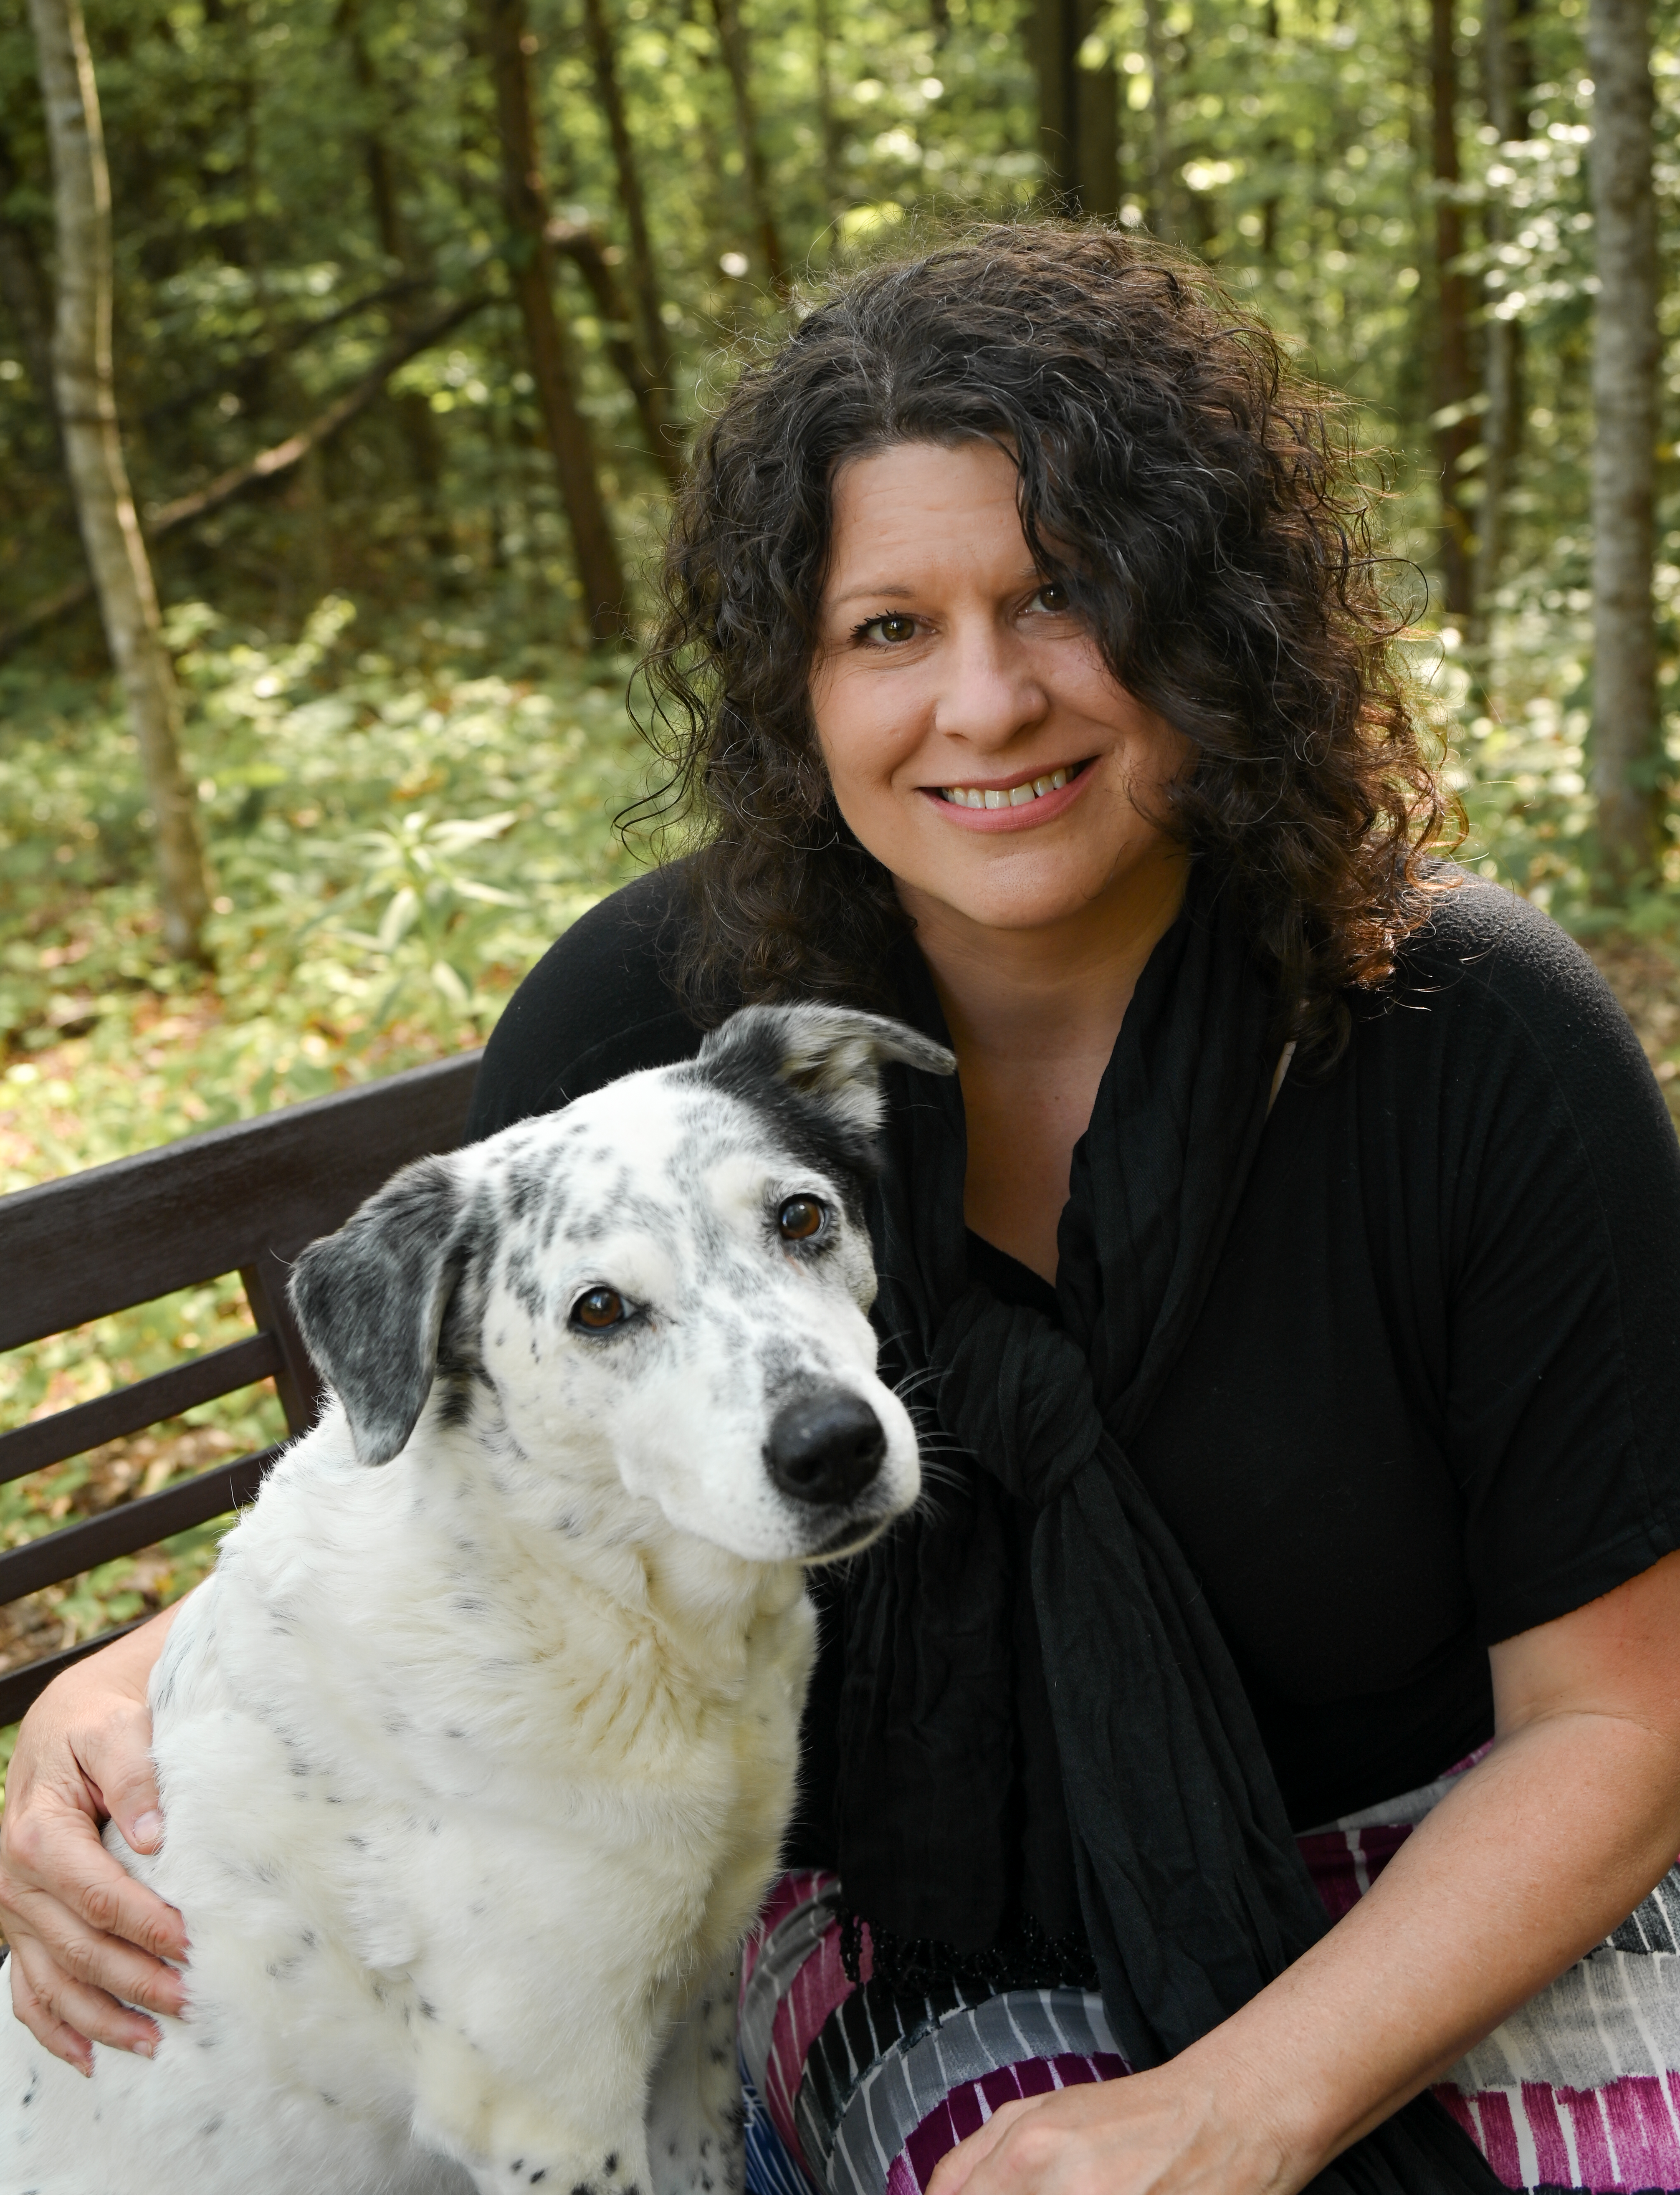 Woman poses with dog